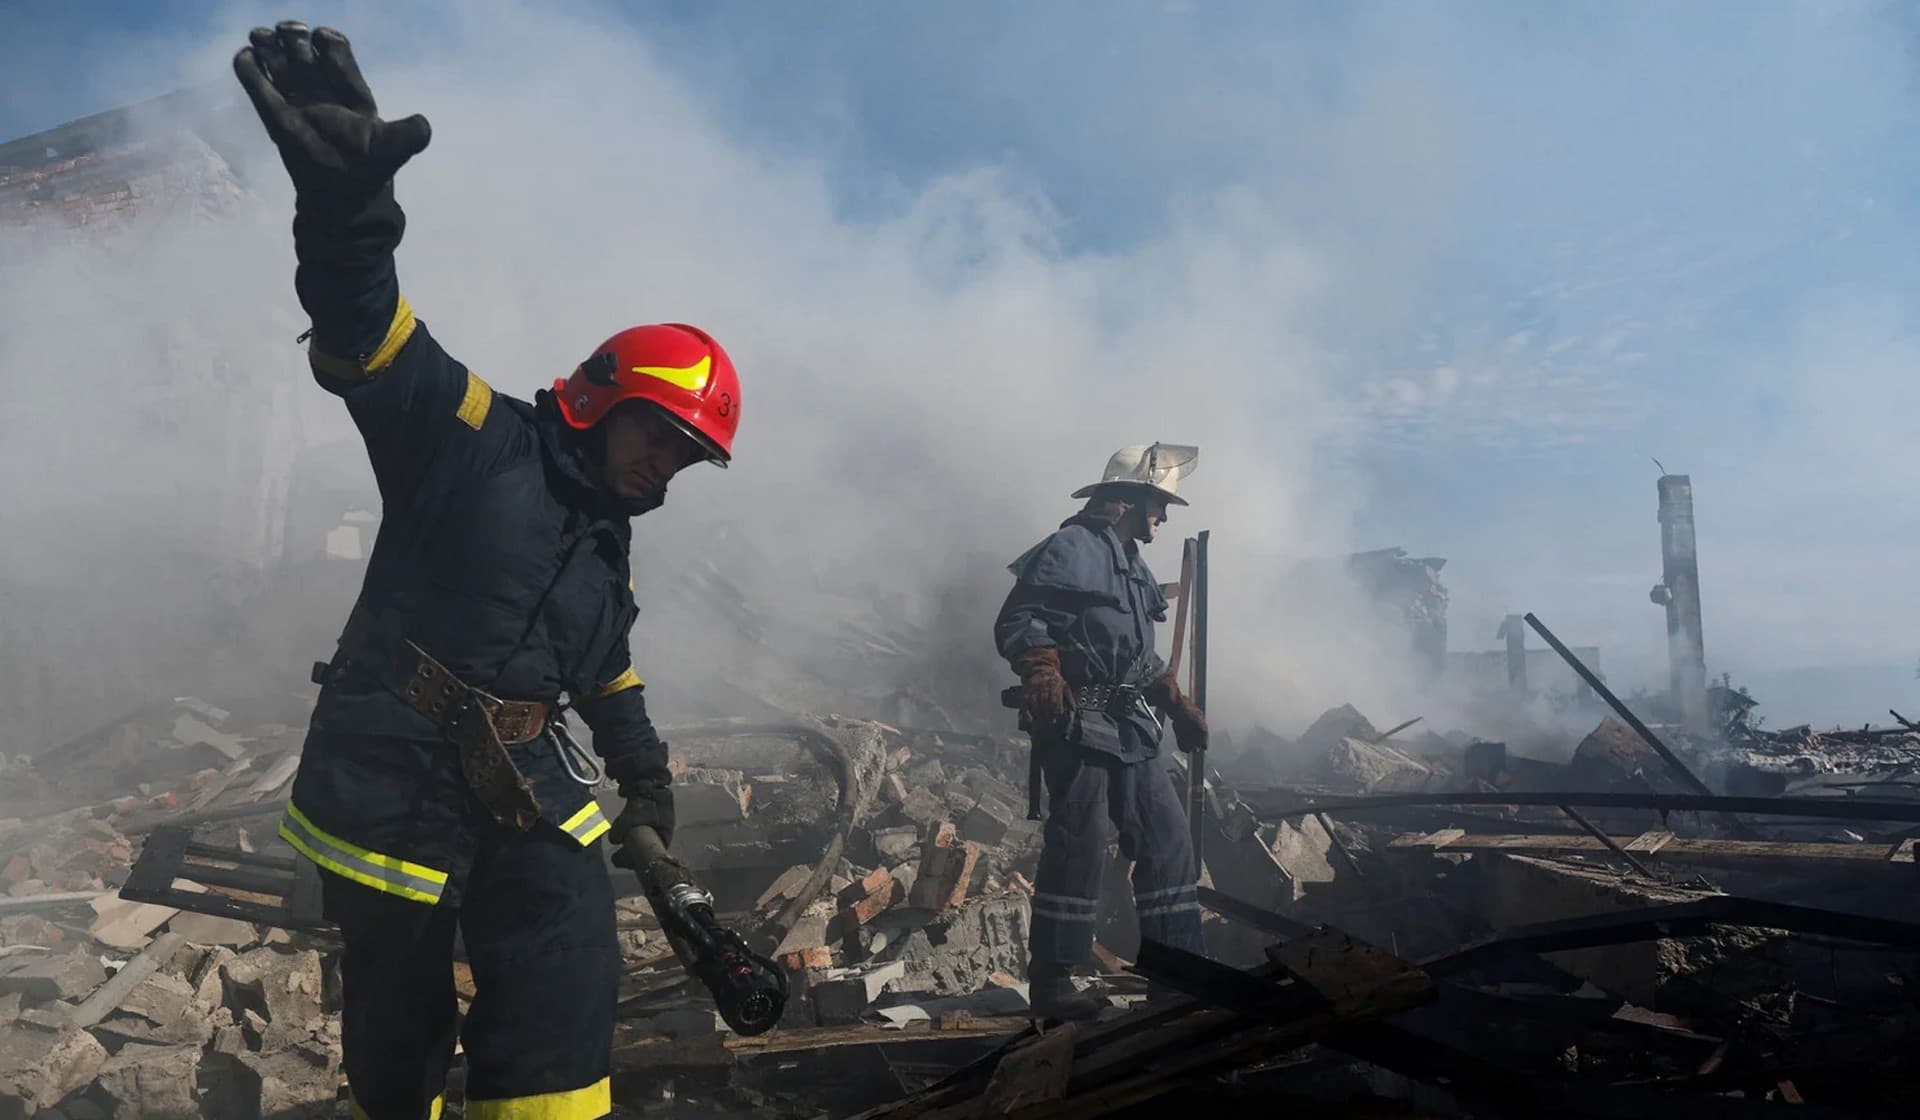 A Ukrainian firefighter puts out fire in a destroyed wholesale market after a Russian strike in Kramatorsk